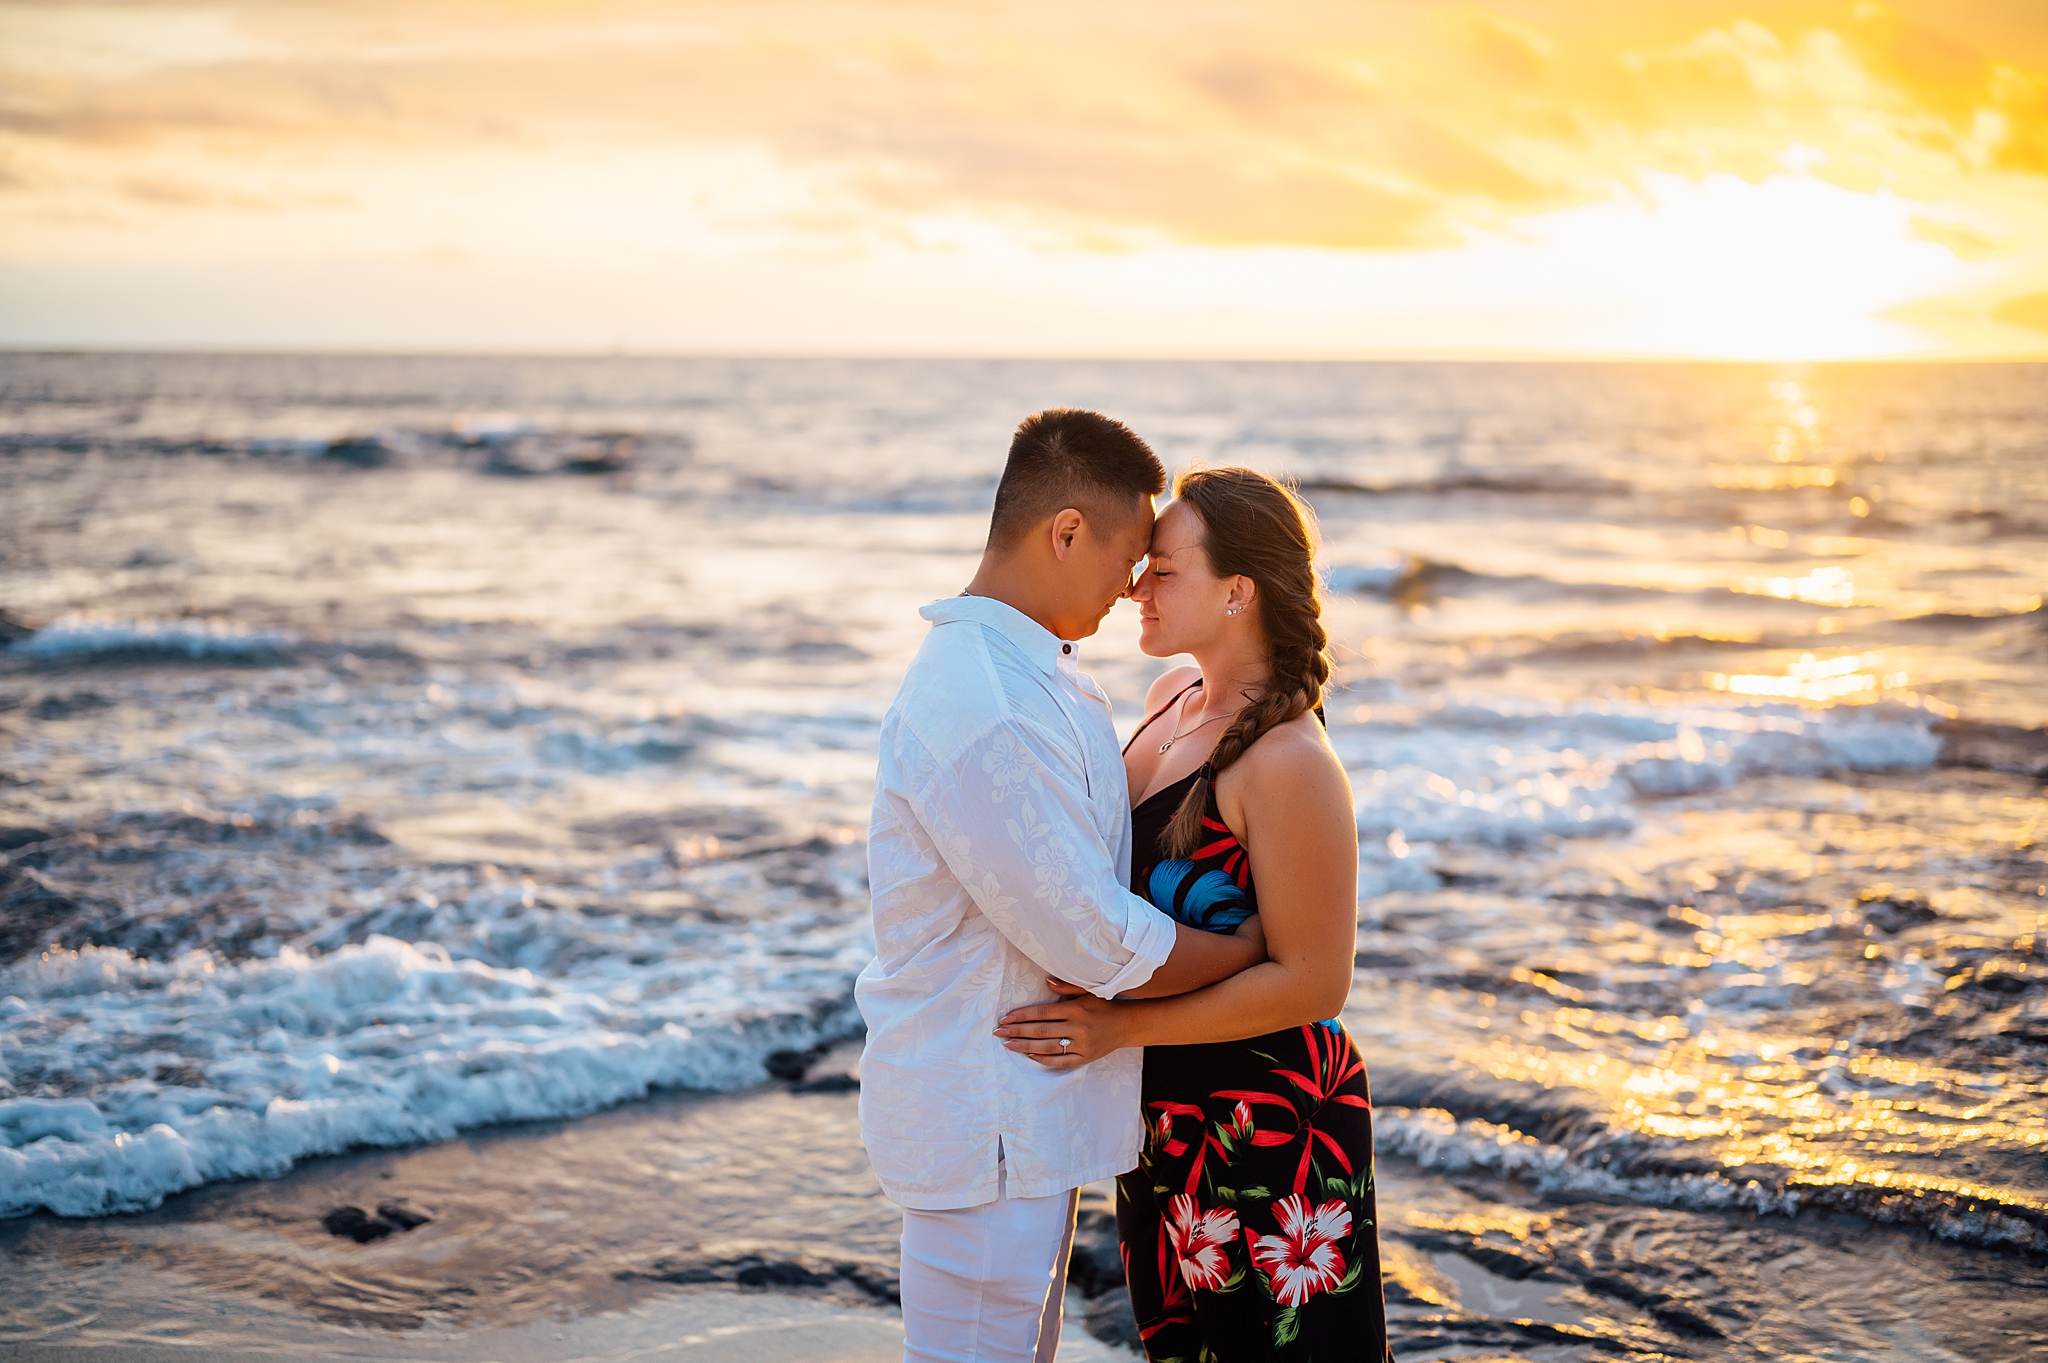 beautiful sunset behind the couple at a beach in Hawaii